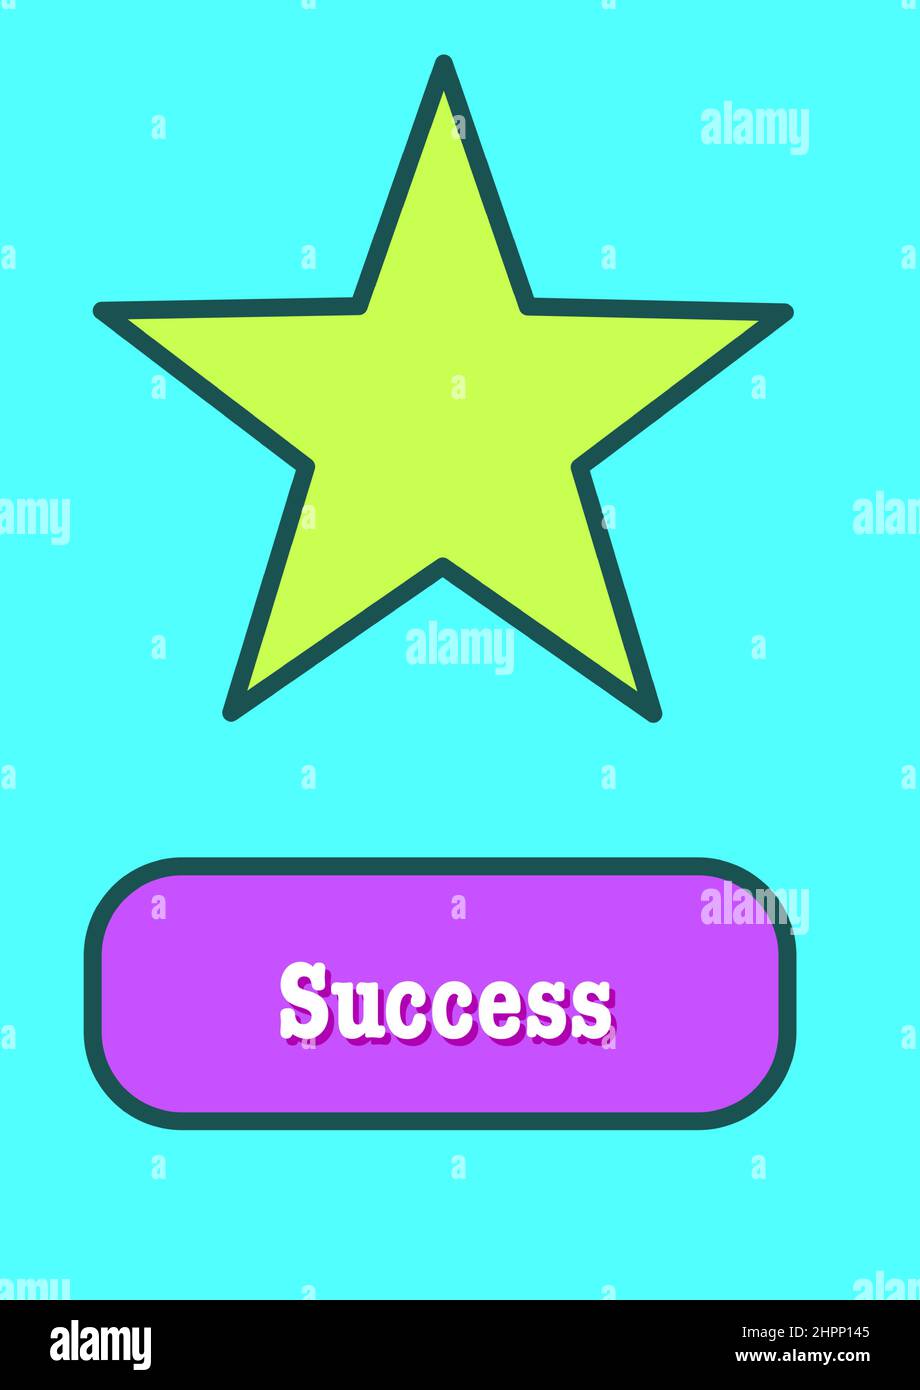 Concept of success with a gold star Stock Vector